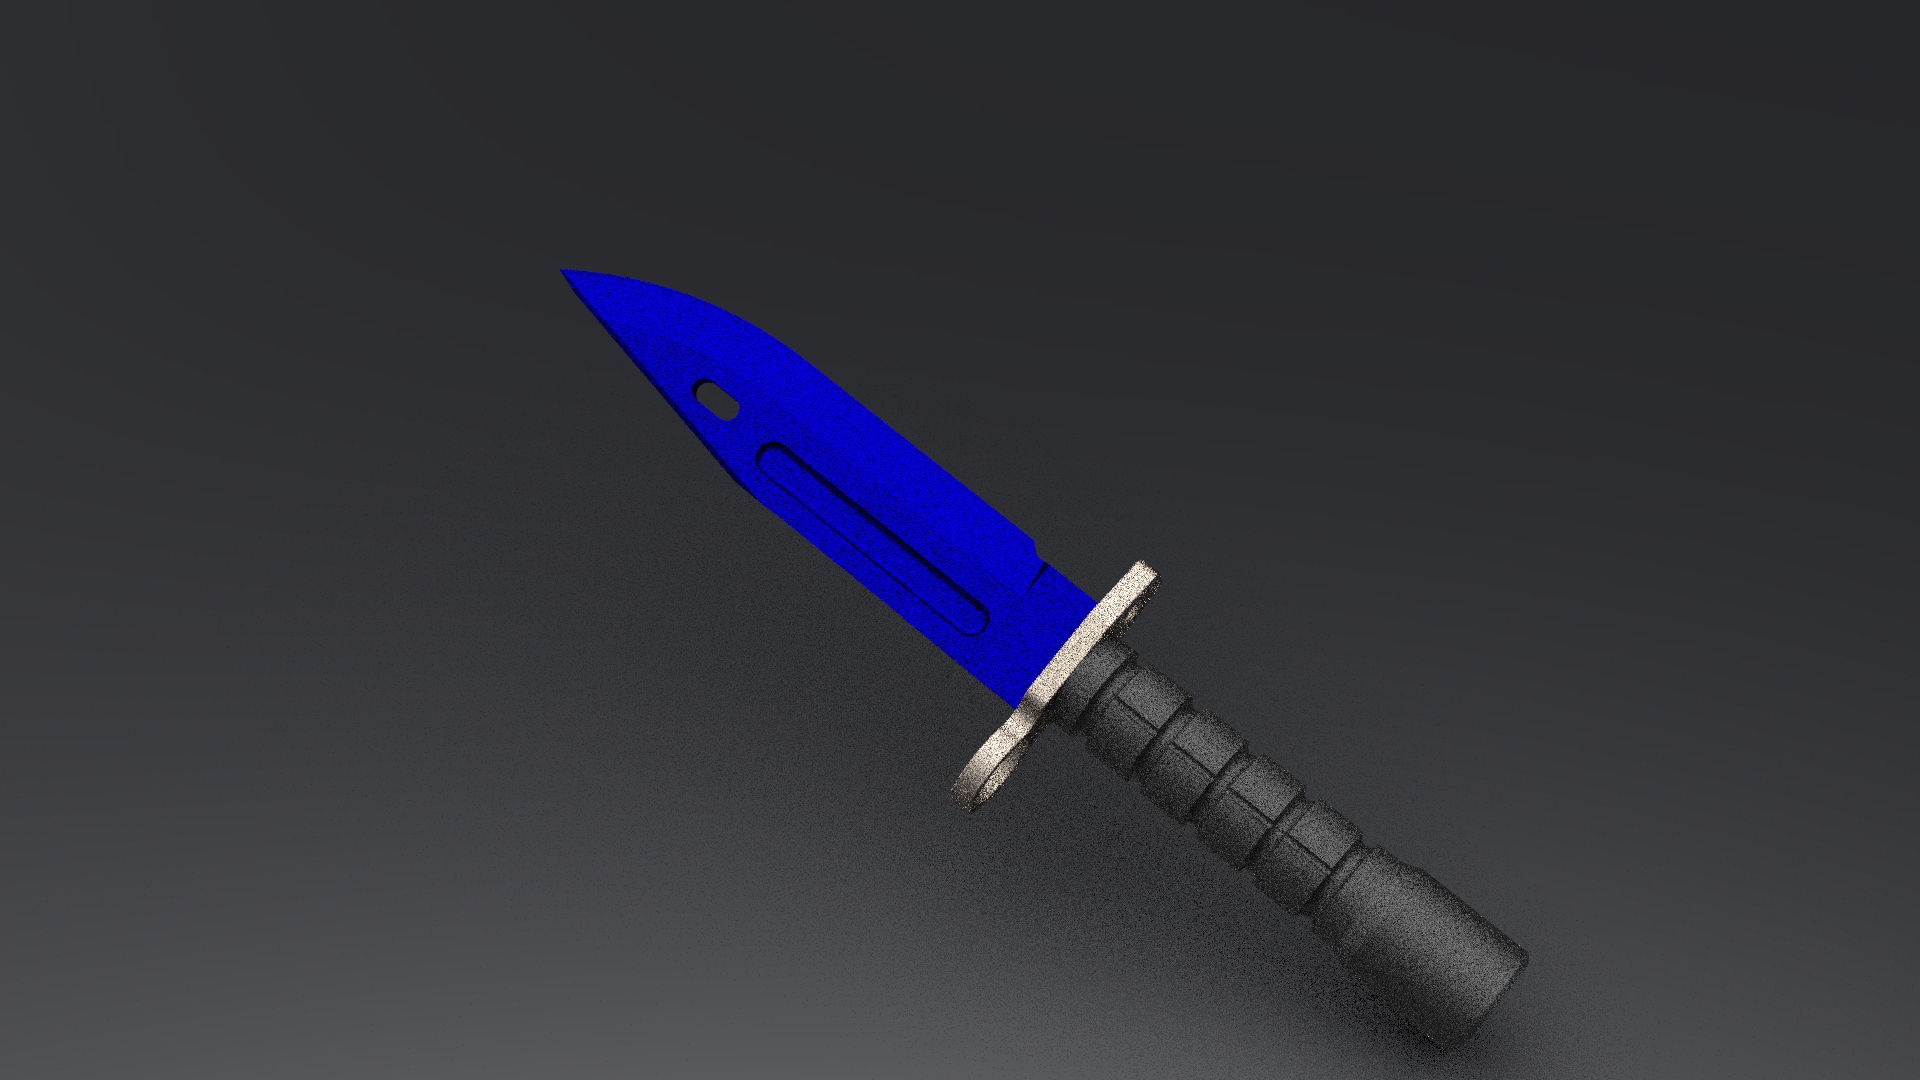 Saber Sword Counter Strike Global Offensive PC Gaming Weapon Knife 1920x1080